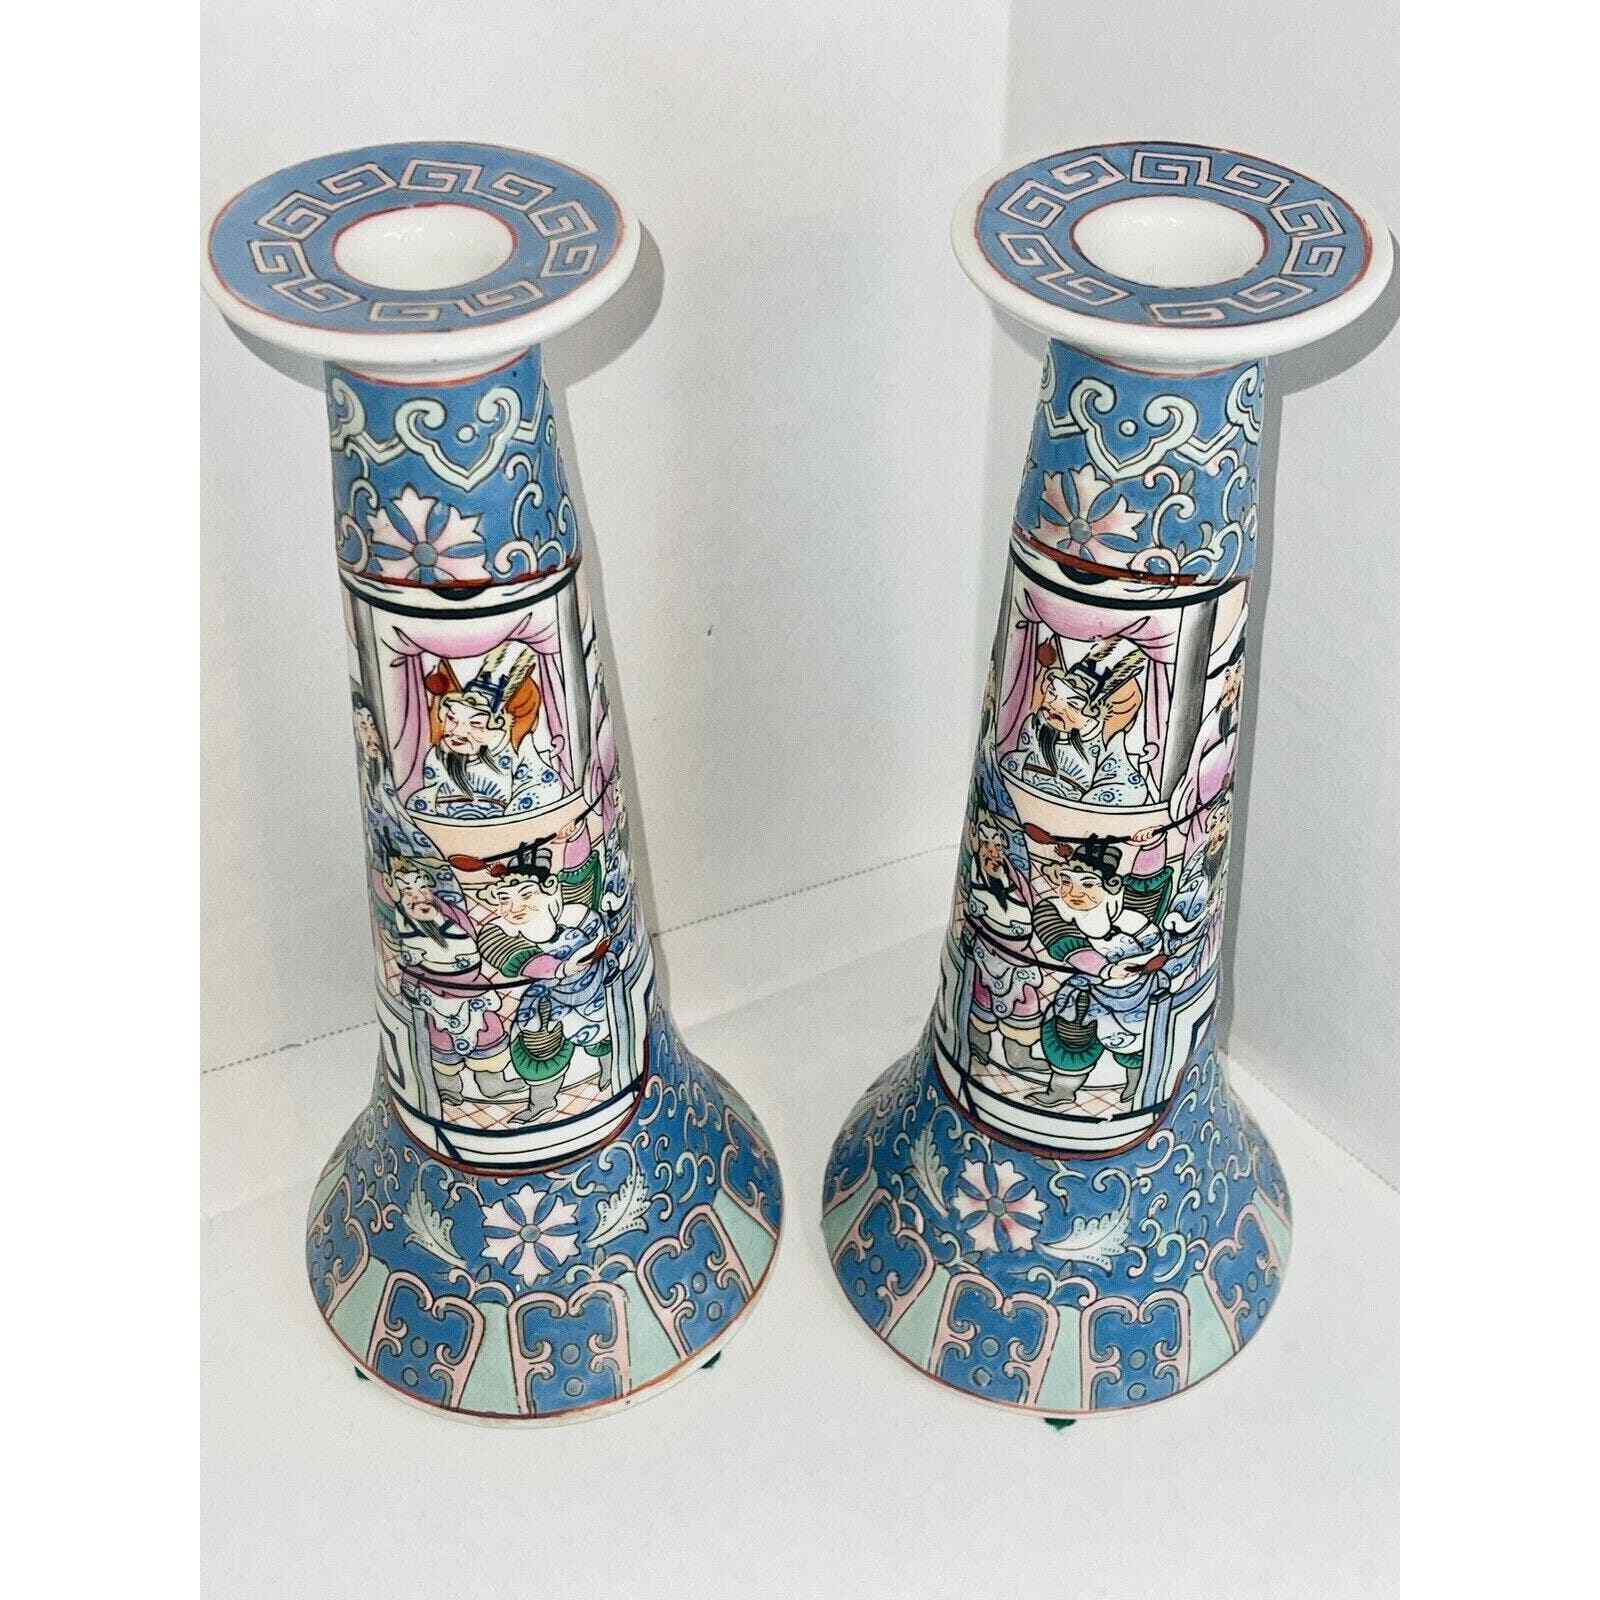 Heygill and H.F.P Oriental 2 Candle Holders Made in Macau One of a Kind RARE ORG